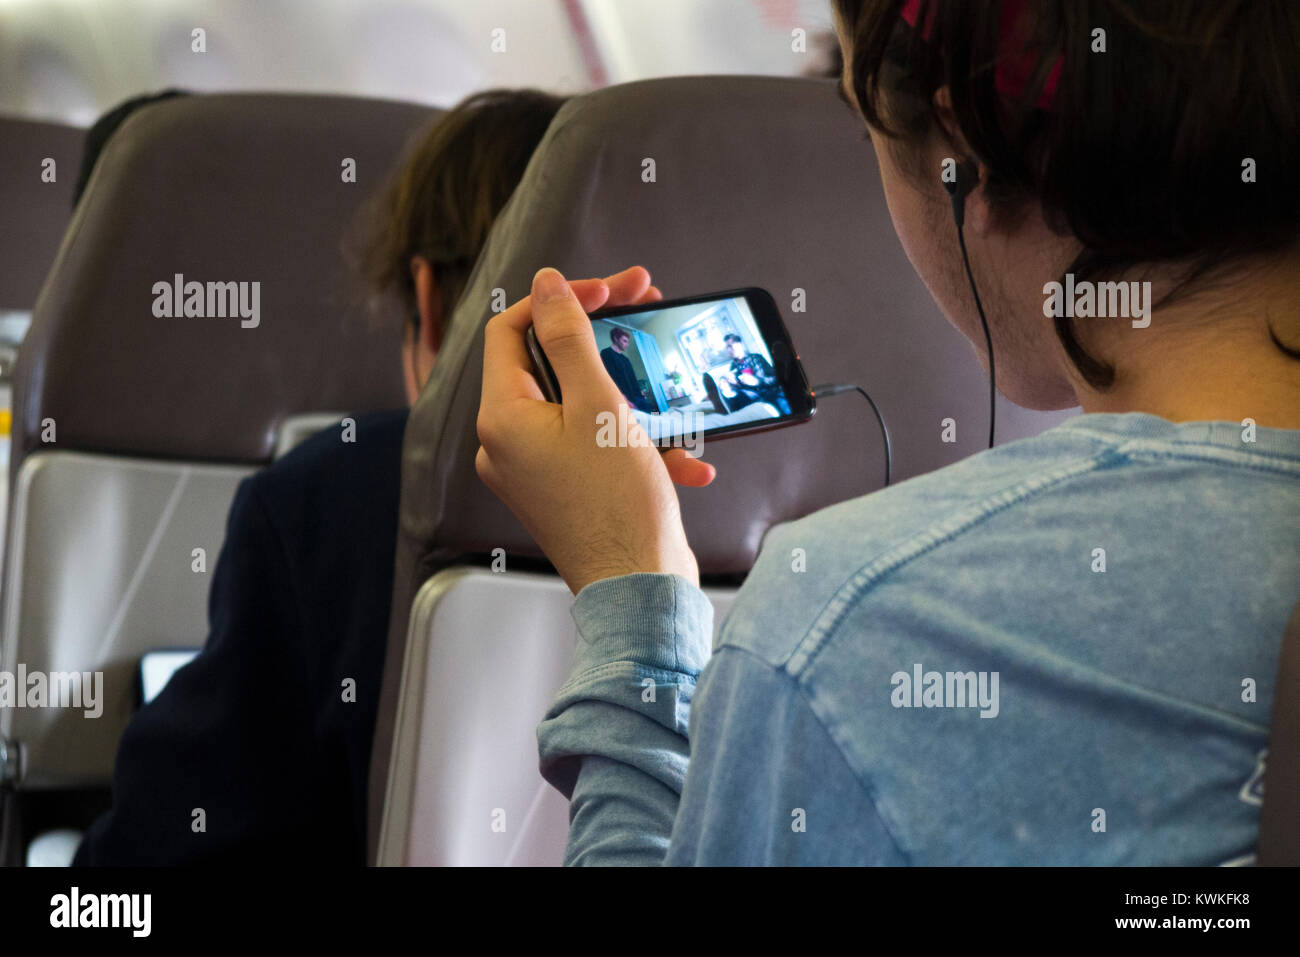 Male passenger playing a show film, movie, or television programme on his mobile phone - in airplane mode, on Embraer air plane / aeroplane / airplane Stock Photo